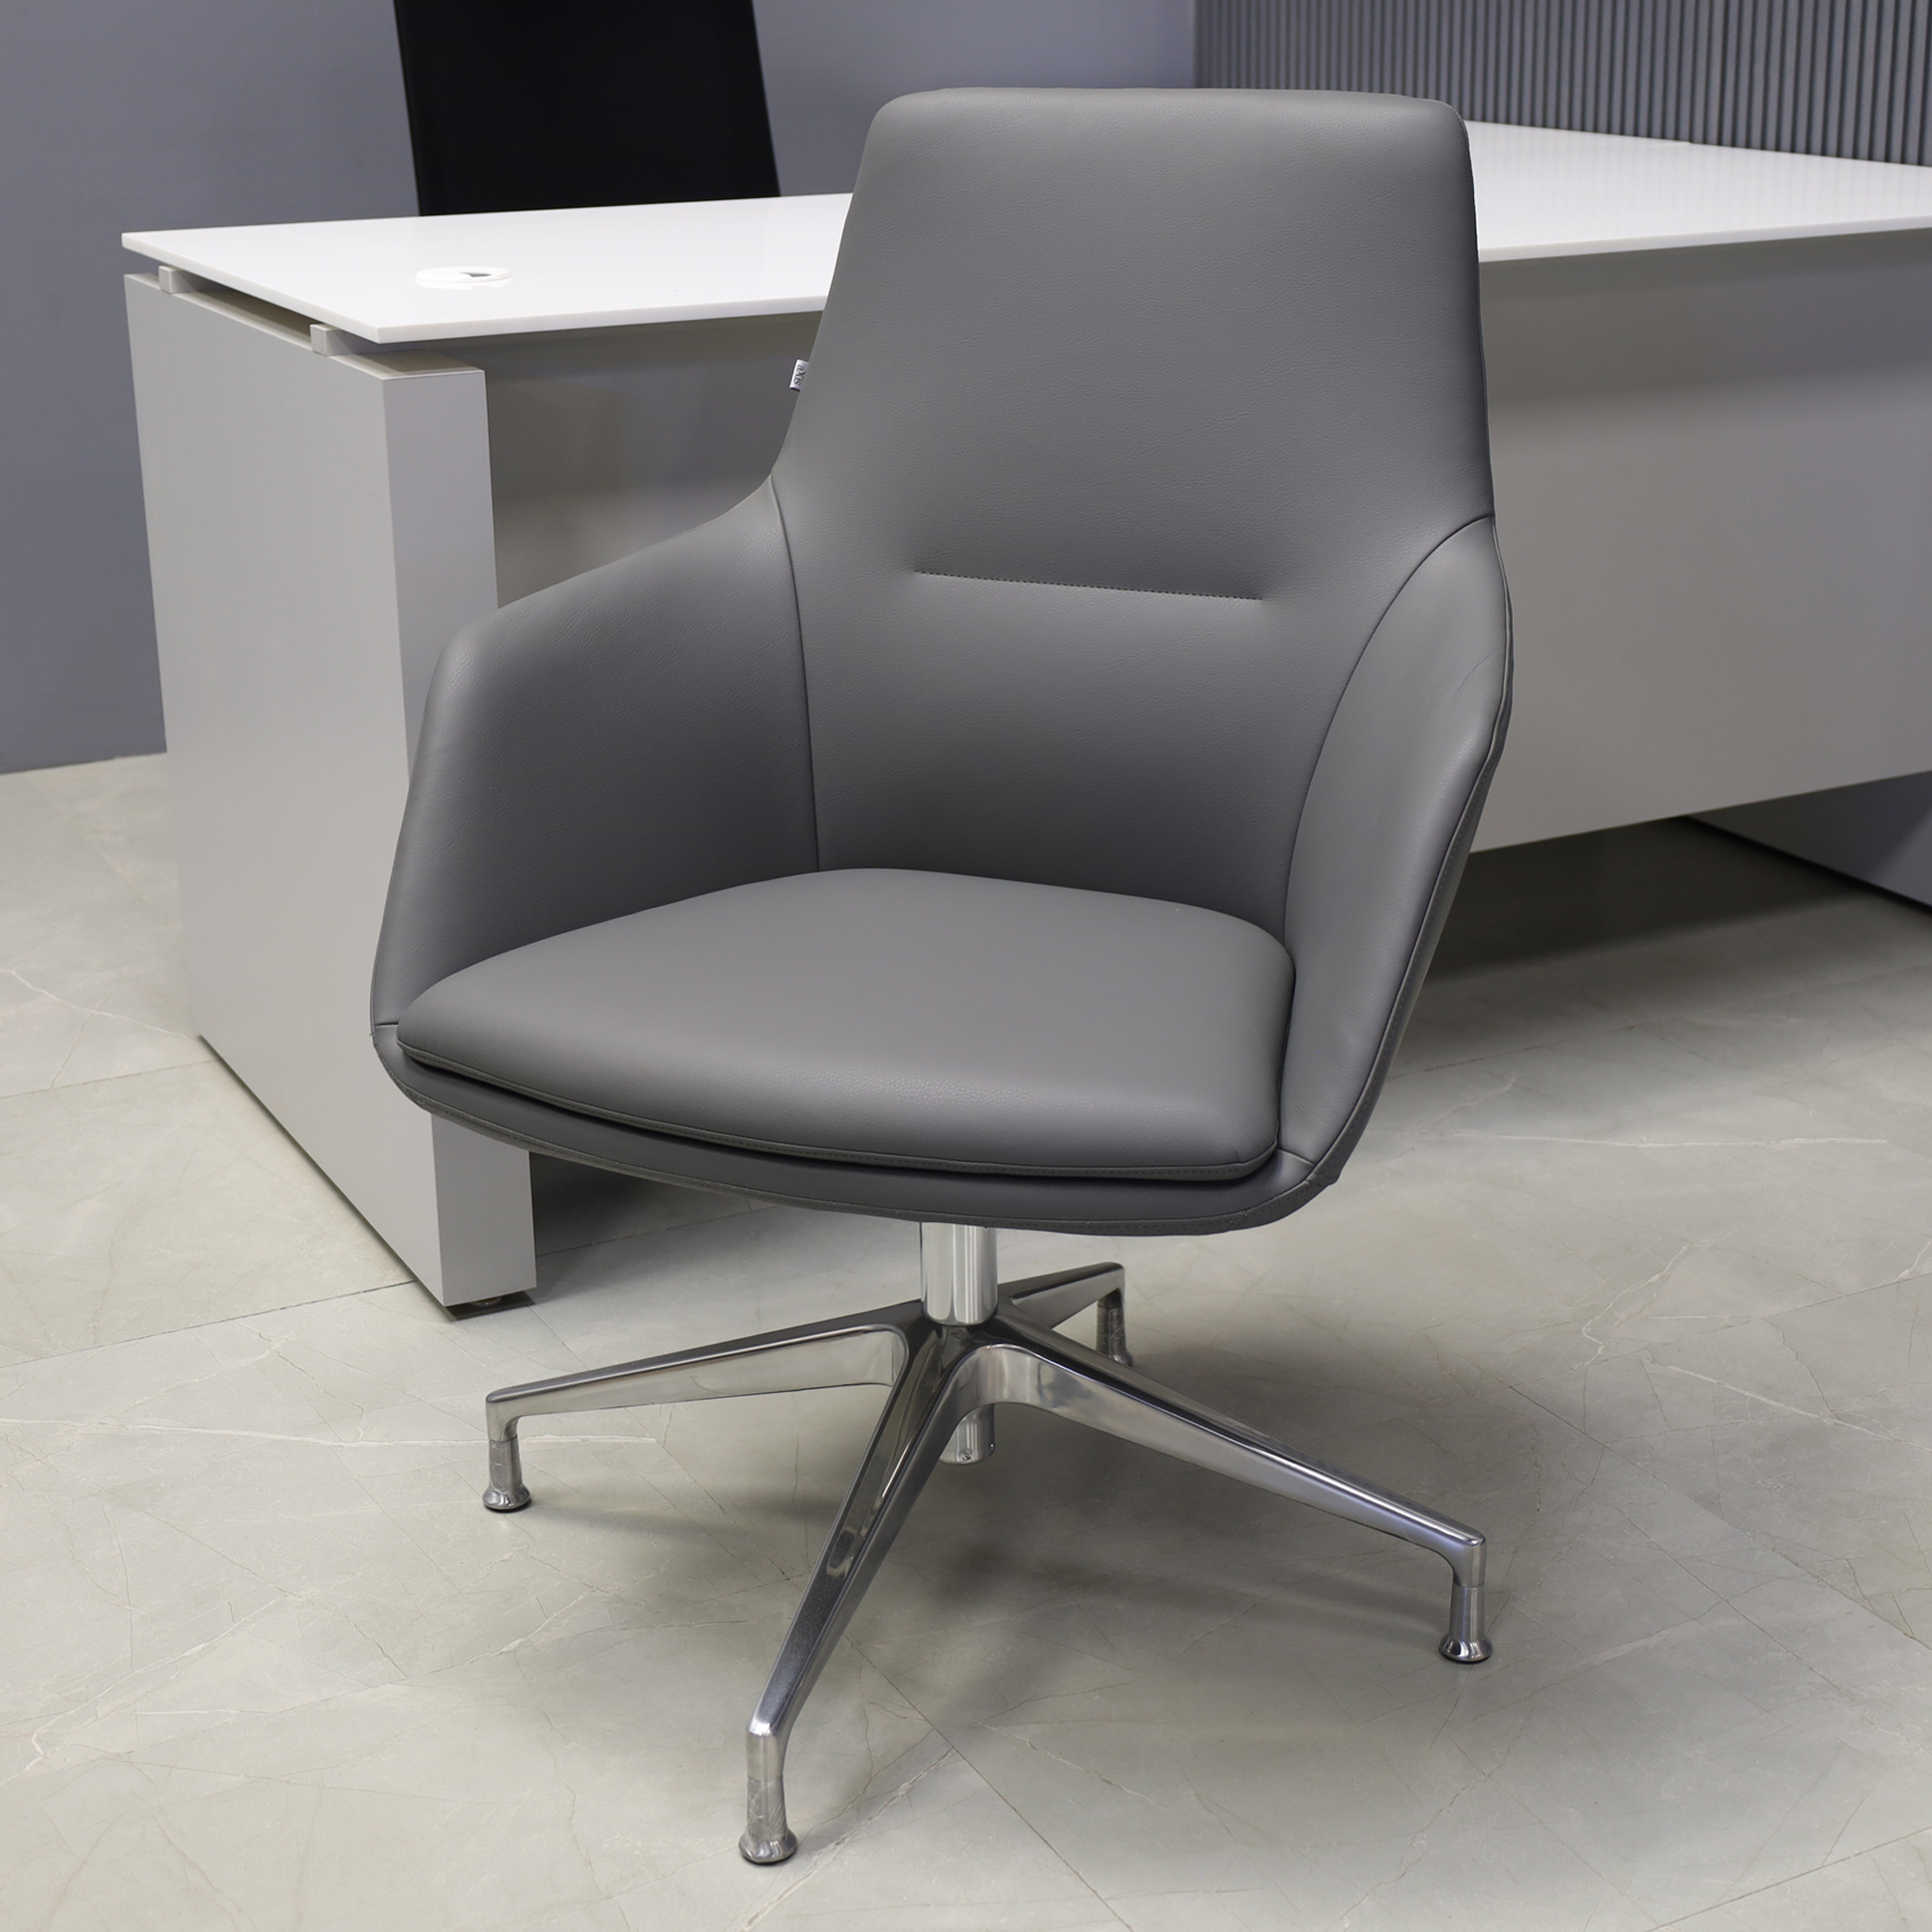 Silla Guest and Lobby Chair in gray leatherette, shown here.